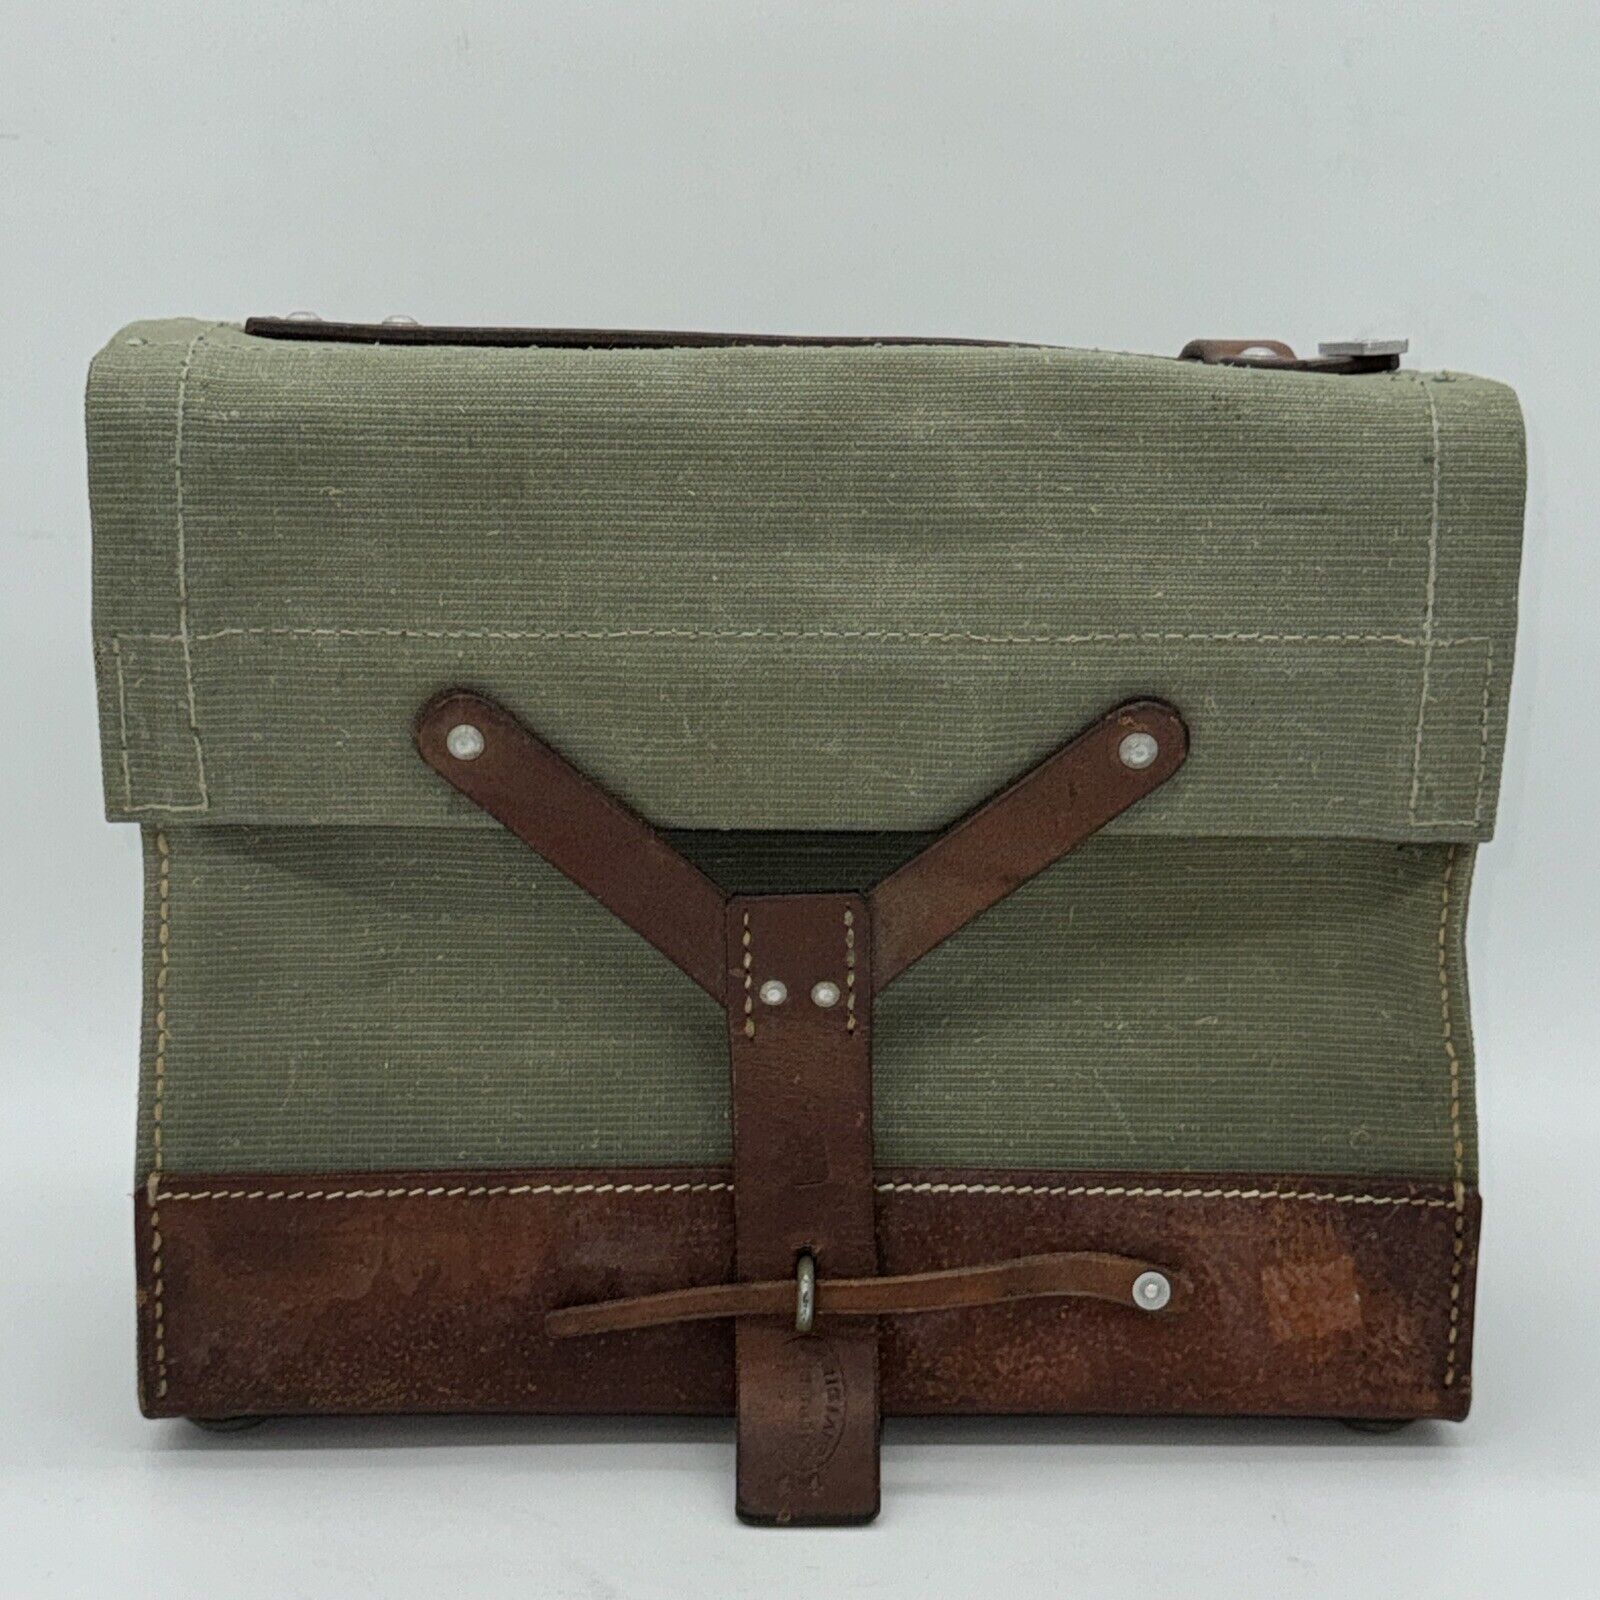 VTG Swiss Military Leather and Green Canvas Carry Bag A. Burns Selliers Givisiez